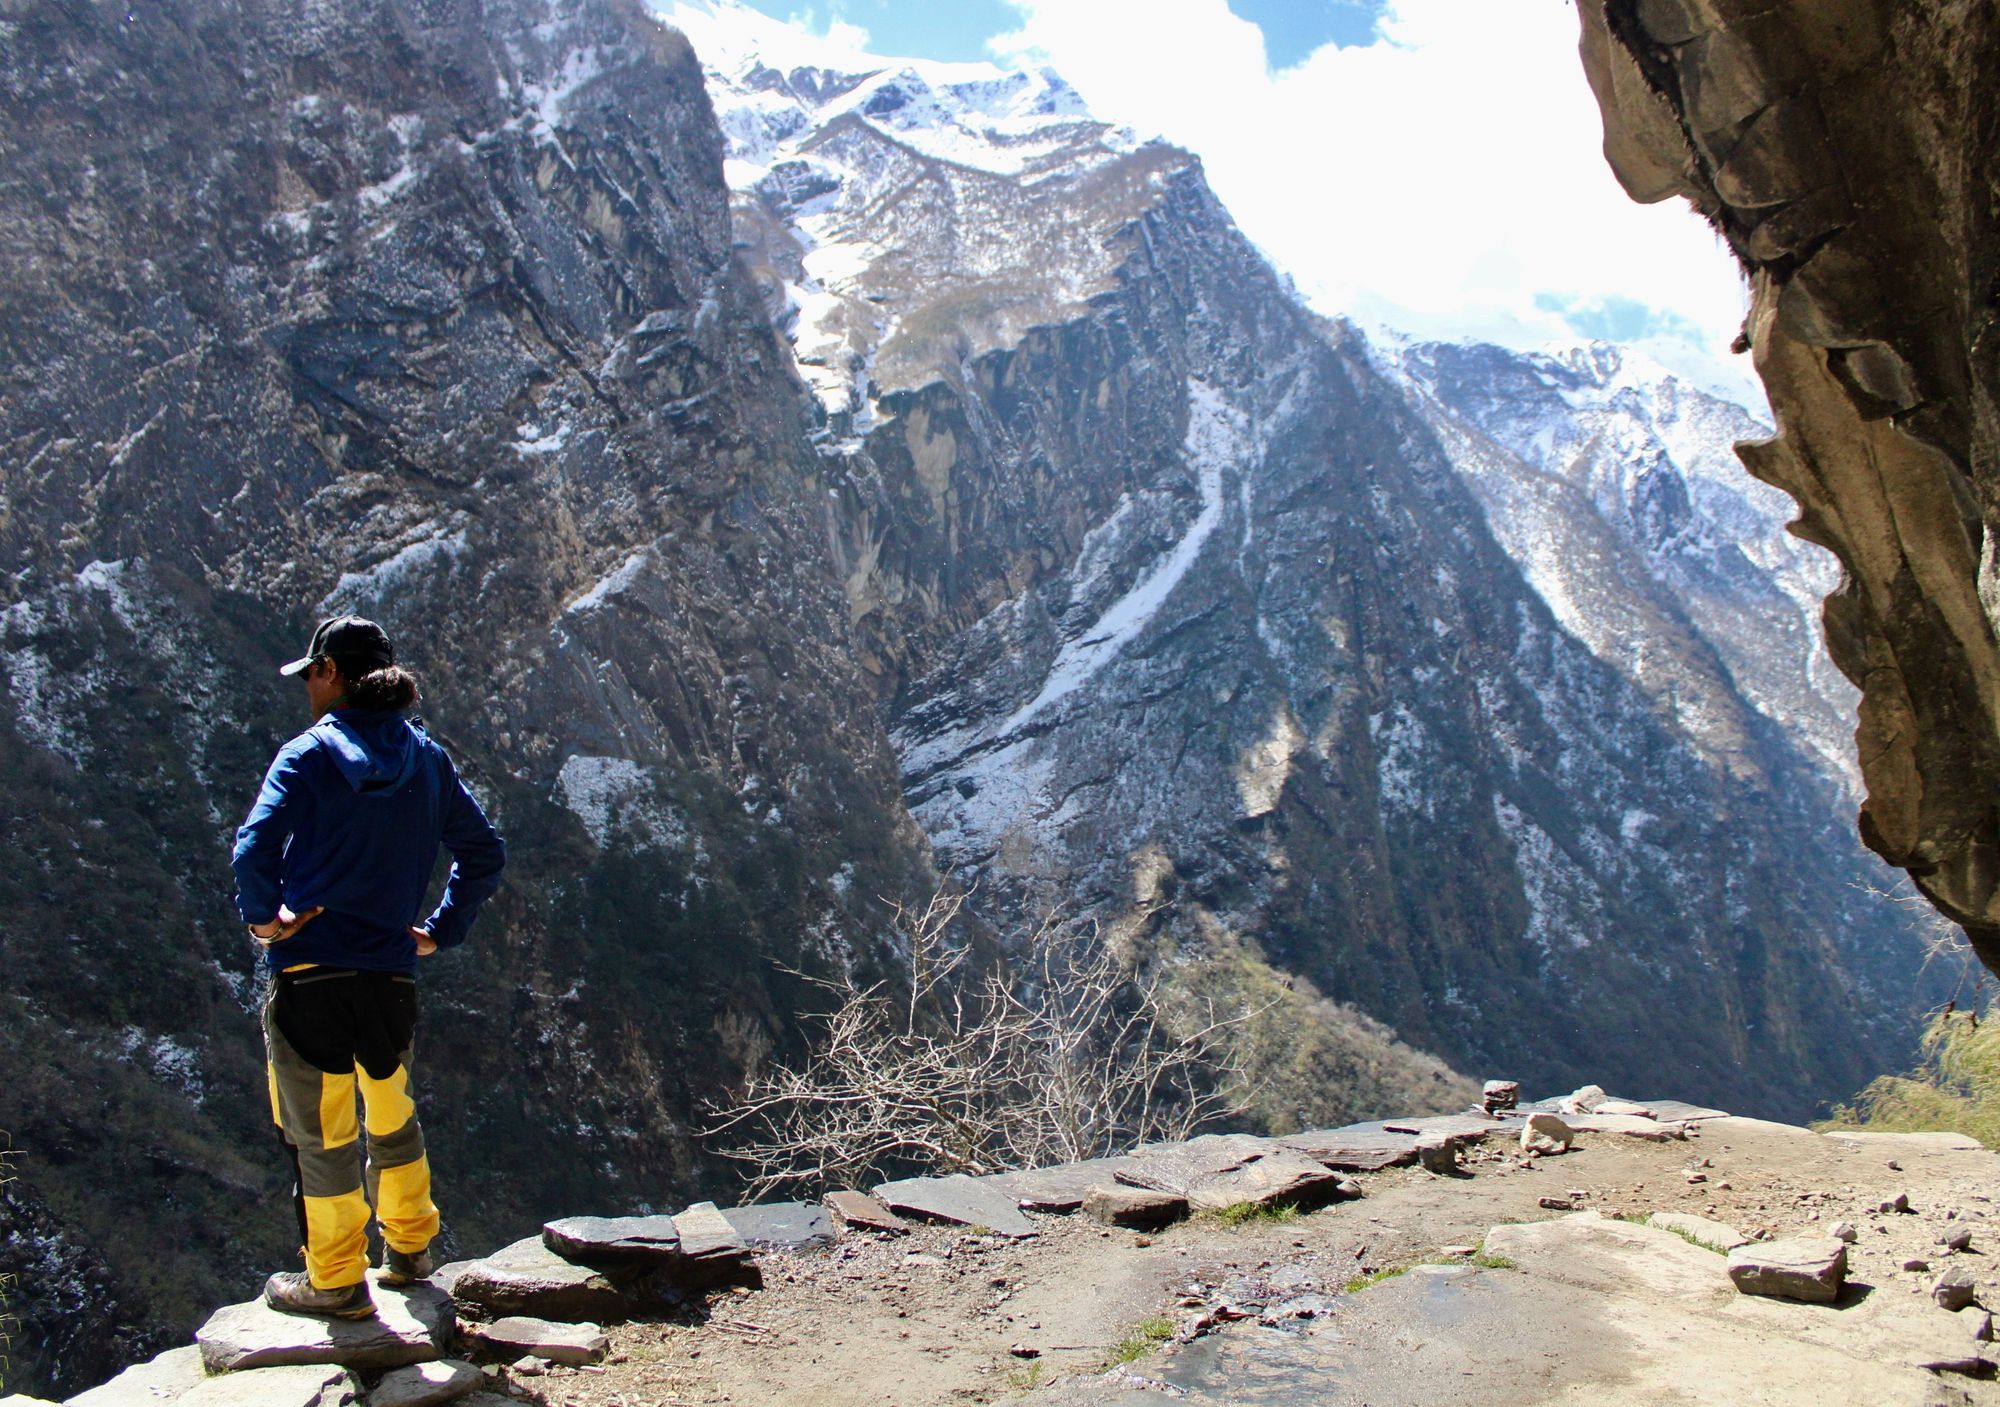 Looking out at the Himalayas from Hinko Cave, Nepal.